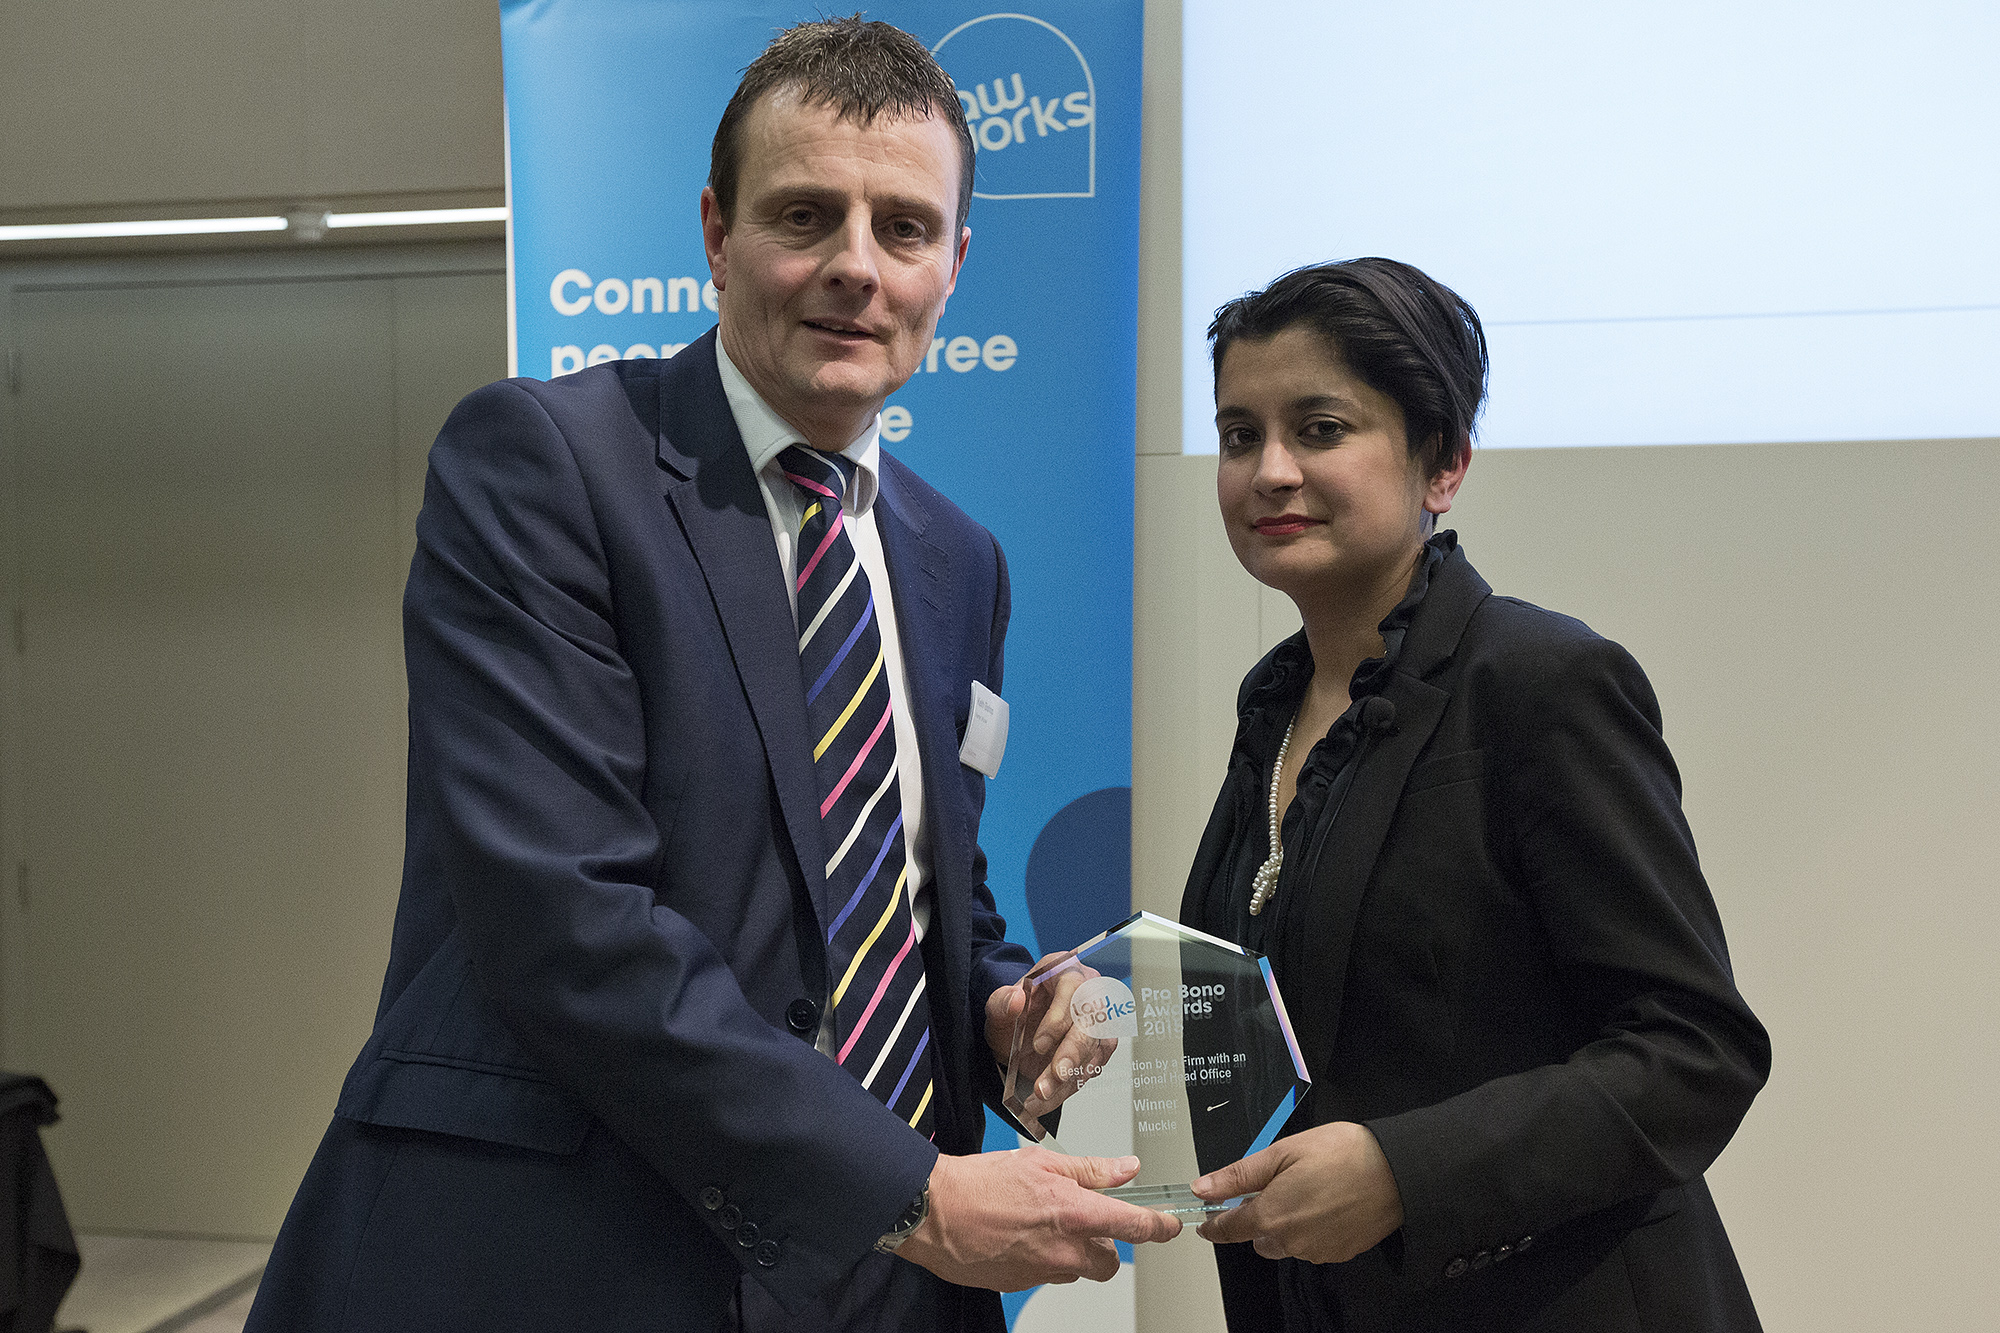 Keith Bishop receiving the Best Contribution by a Regional Law Firm on behalf of Muckle given by Shami Chakrabarti.